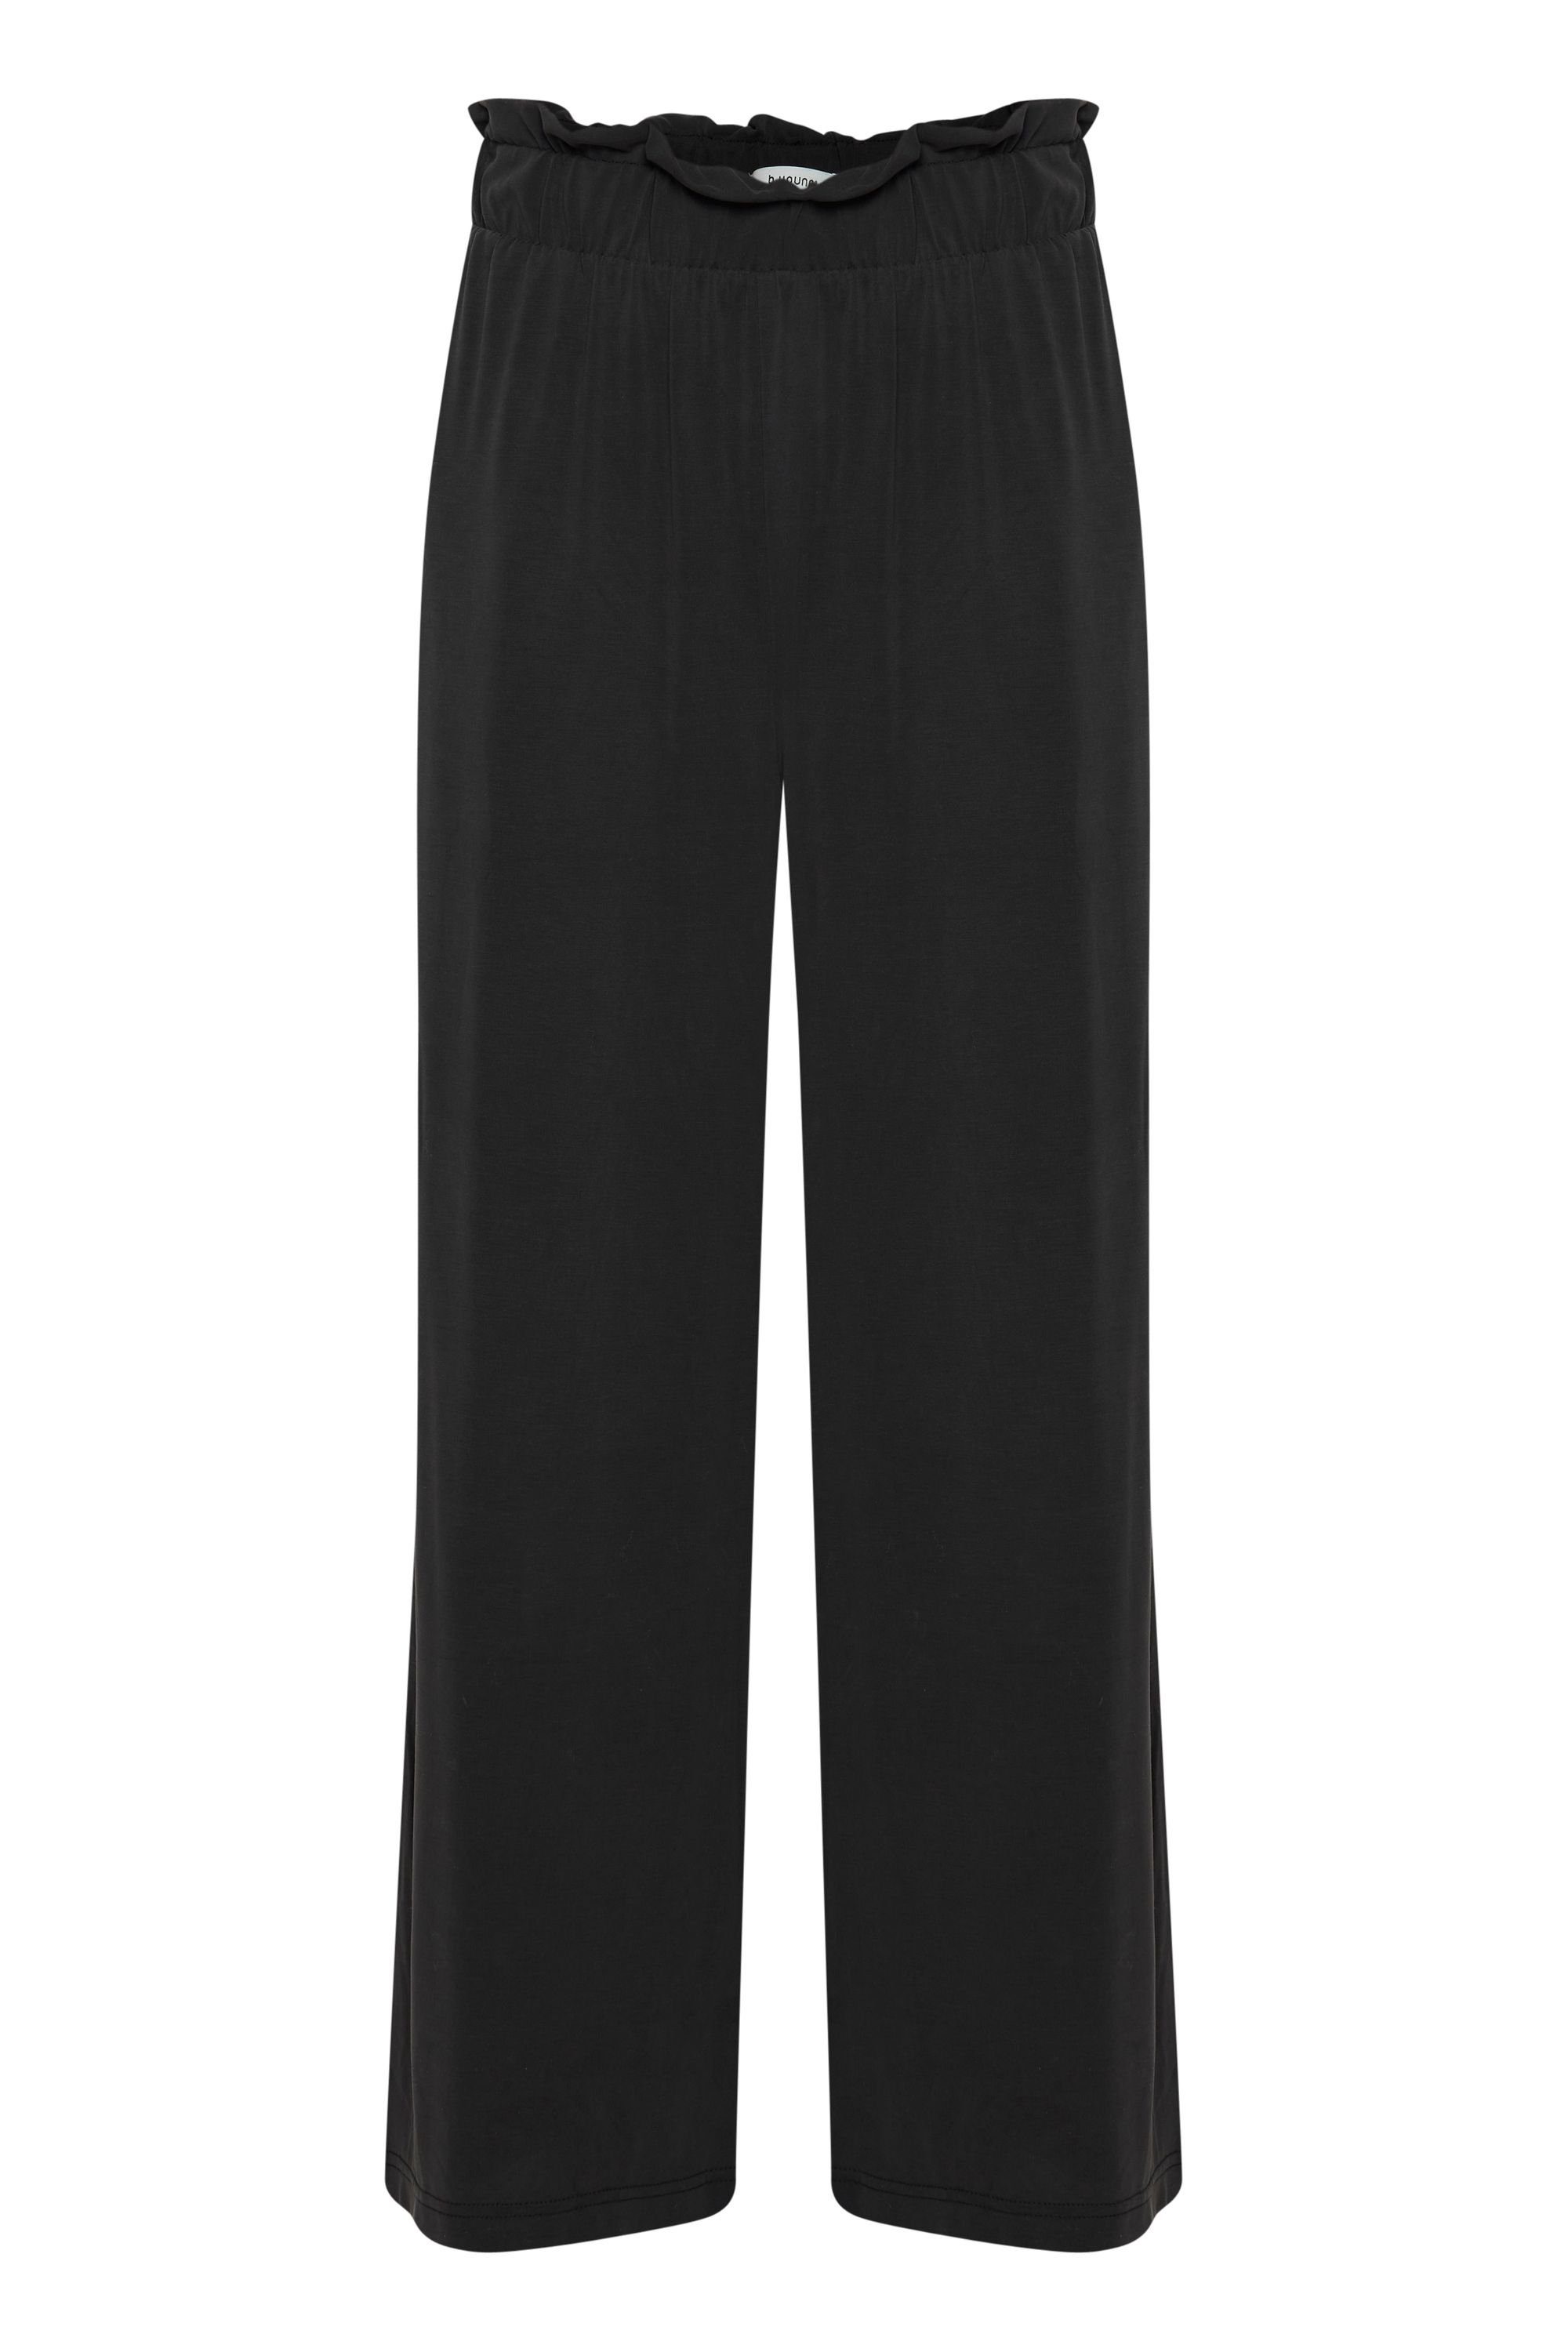 Black (200451) b.young Stoffhose -20811288 PANTS BYPERL